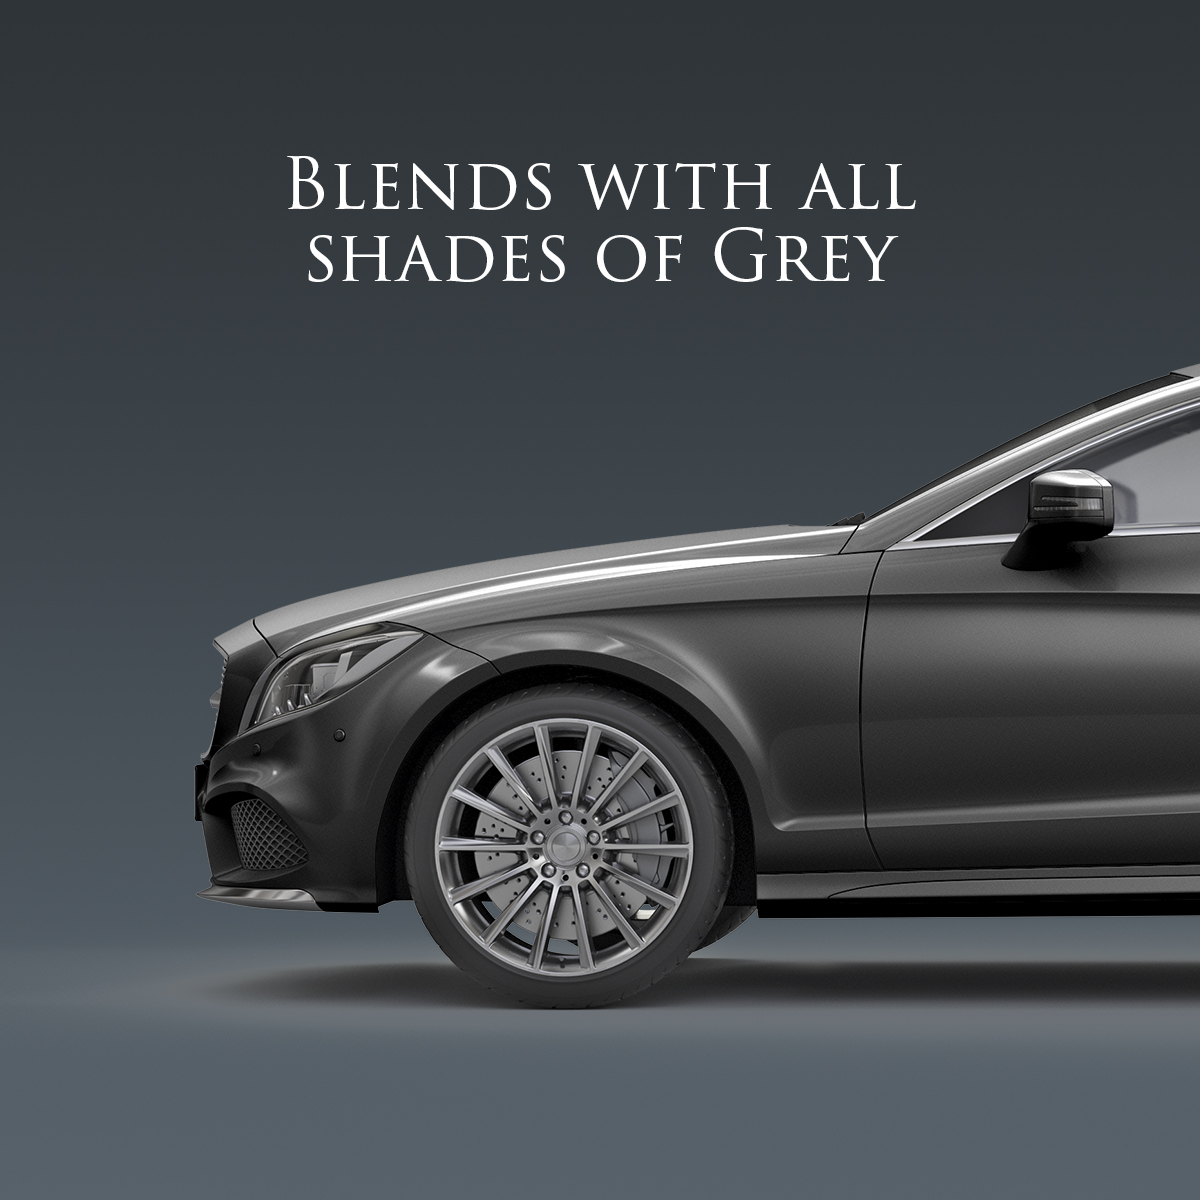 Blends with all shades of grey